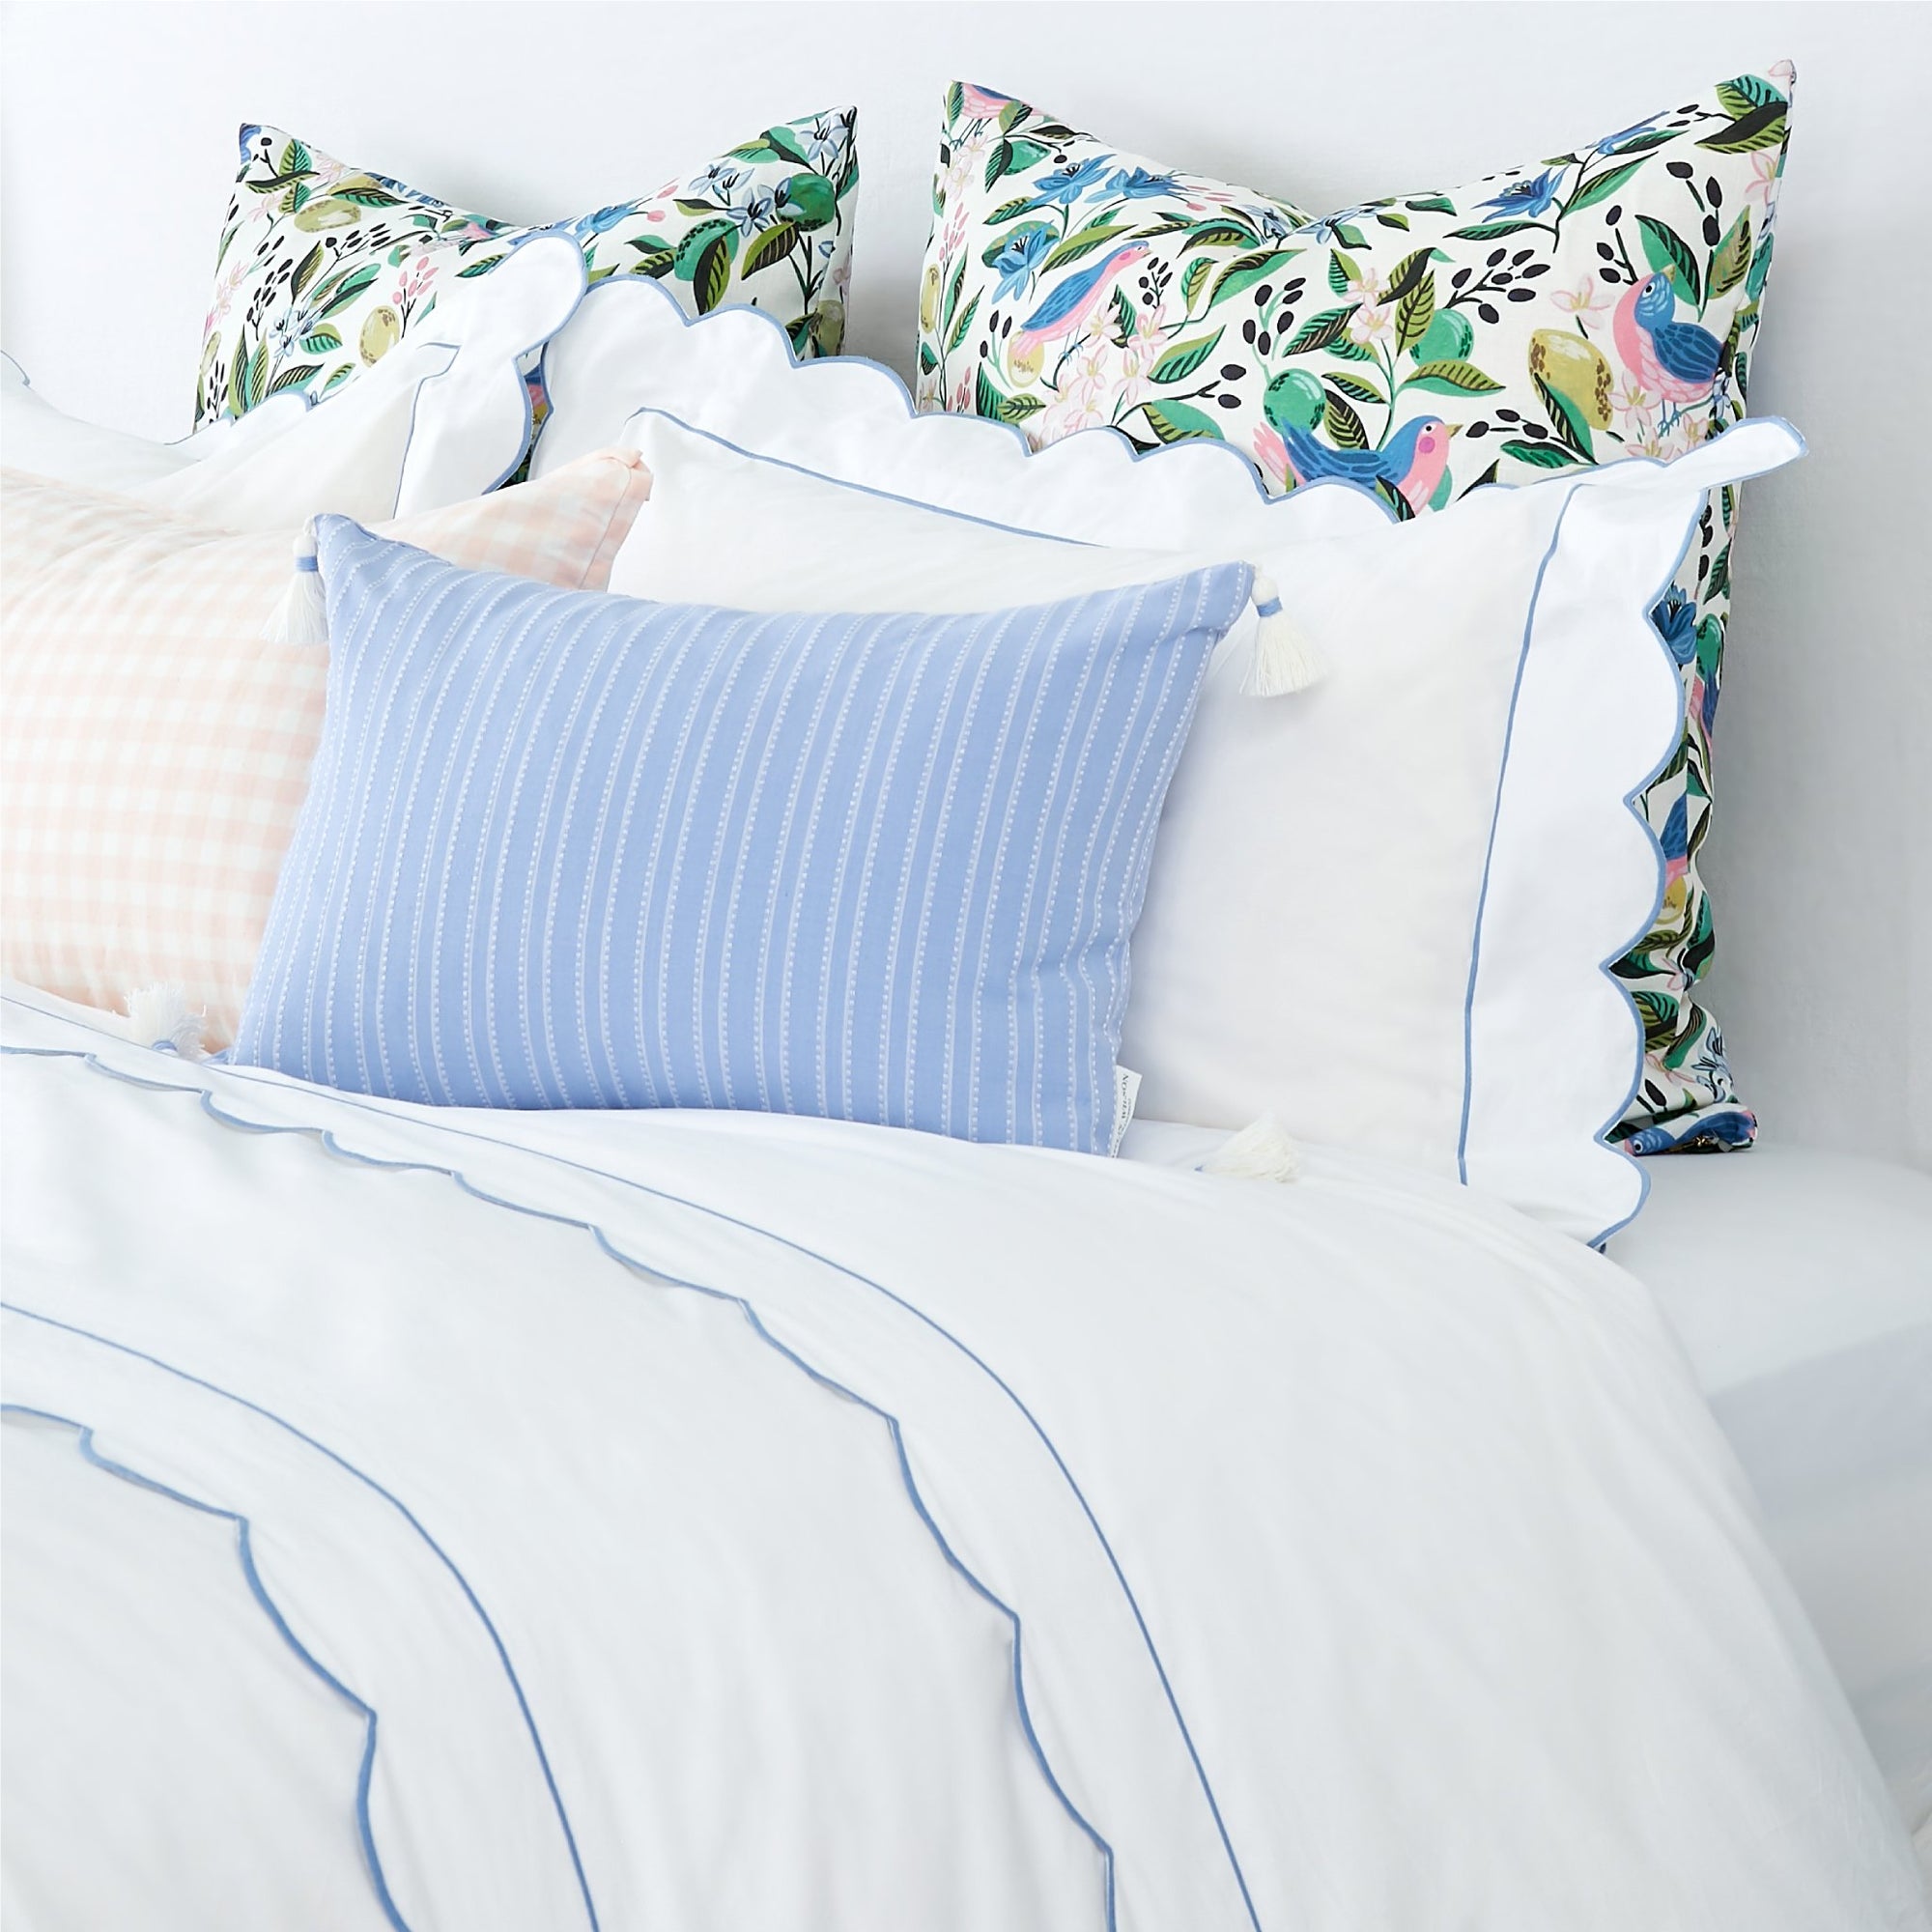 Matouk Butterfield Sham with Ocean Blue Scalloped Edge on Bed